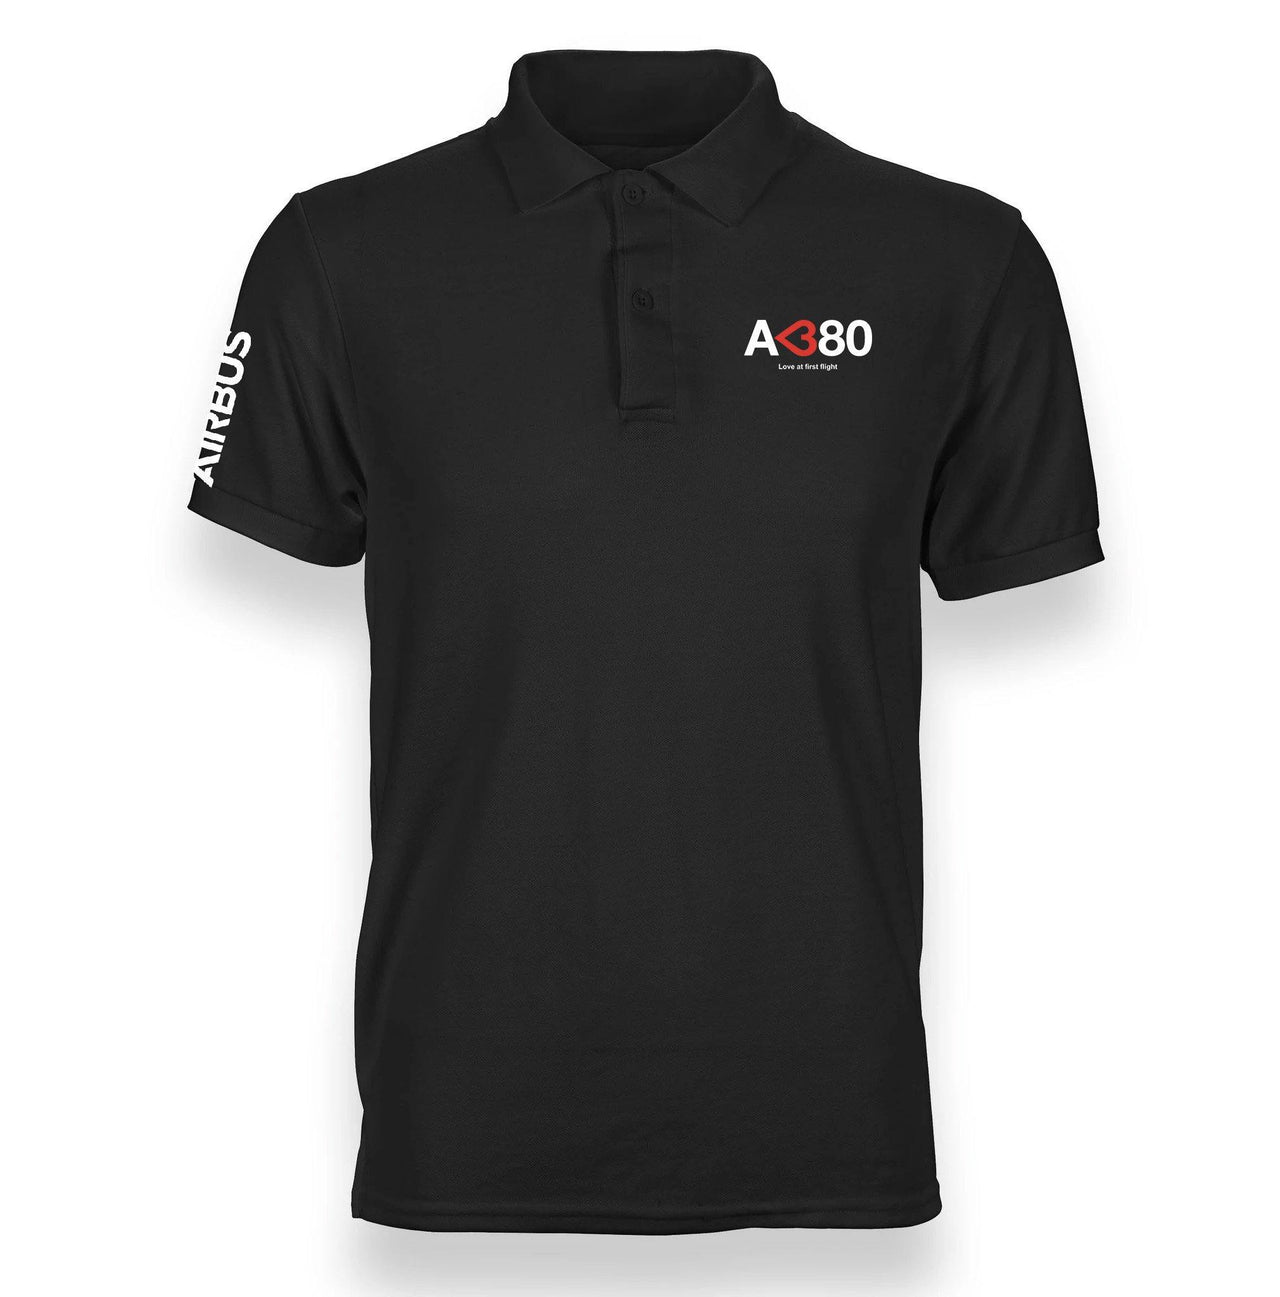 AIRBUS A380 LOVE AT FIRST FLIGHT DESIGNED POLO SHIRT THE AV8R